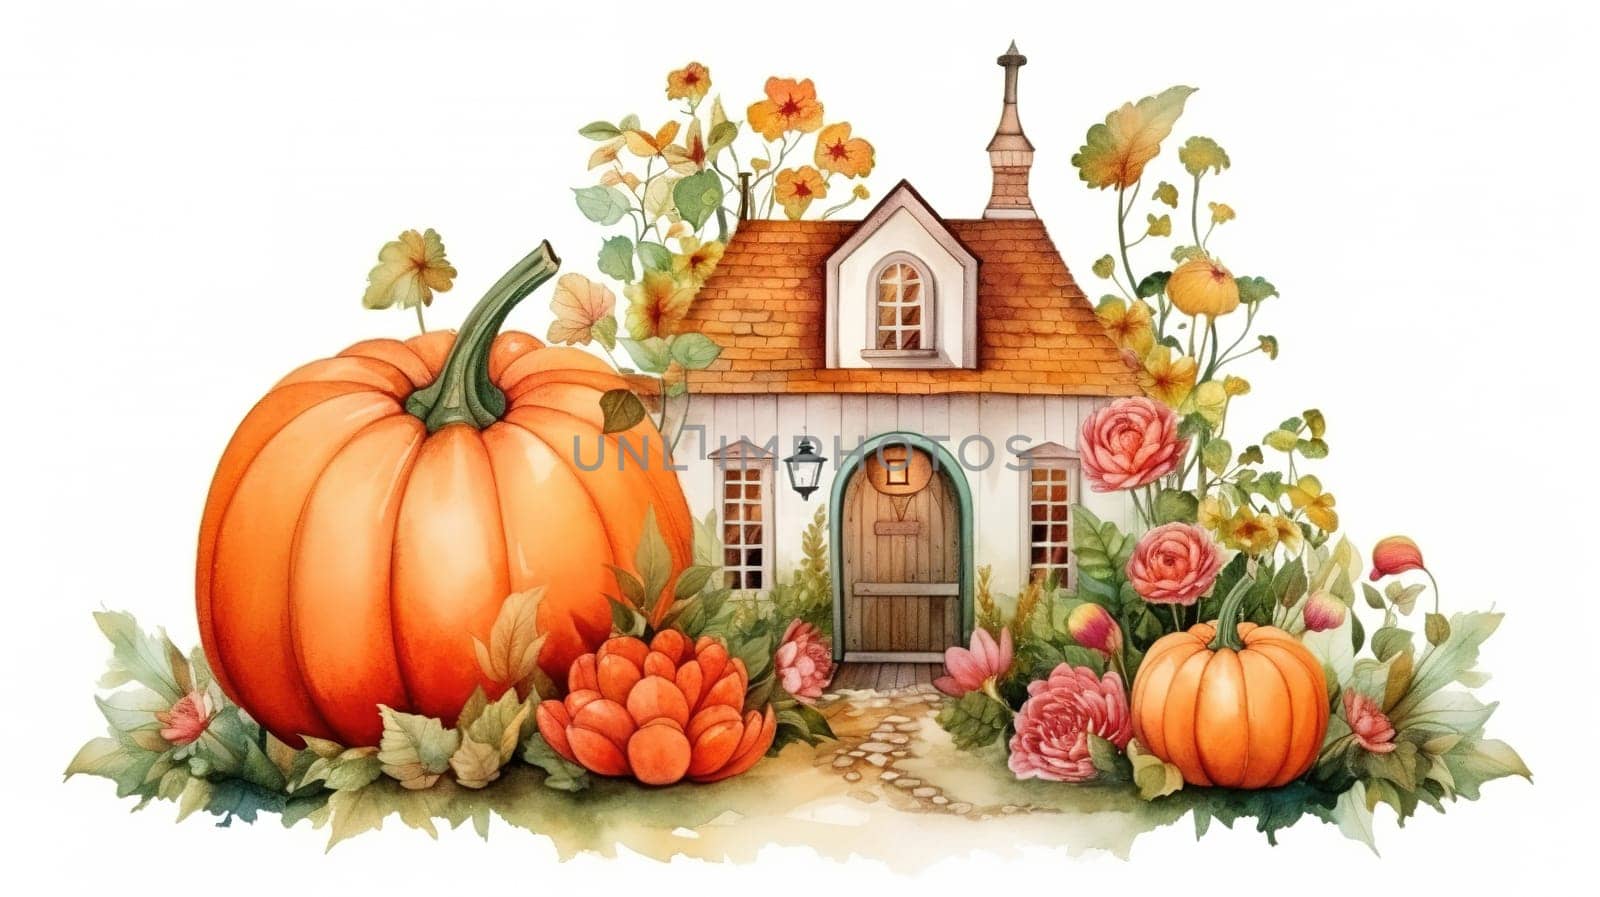 Charming wooden fairy house among orange dahlias and ripe pumpkins, beautiful roof and flowers garden by KaterinaDalemans